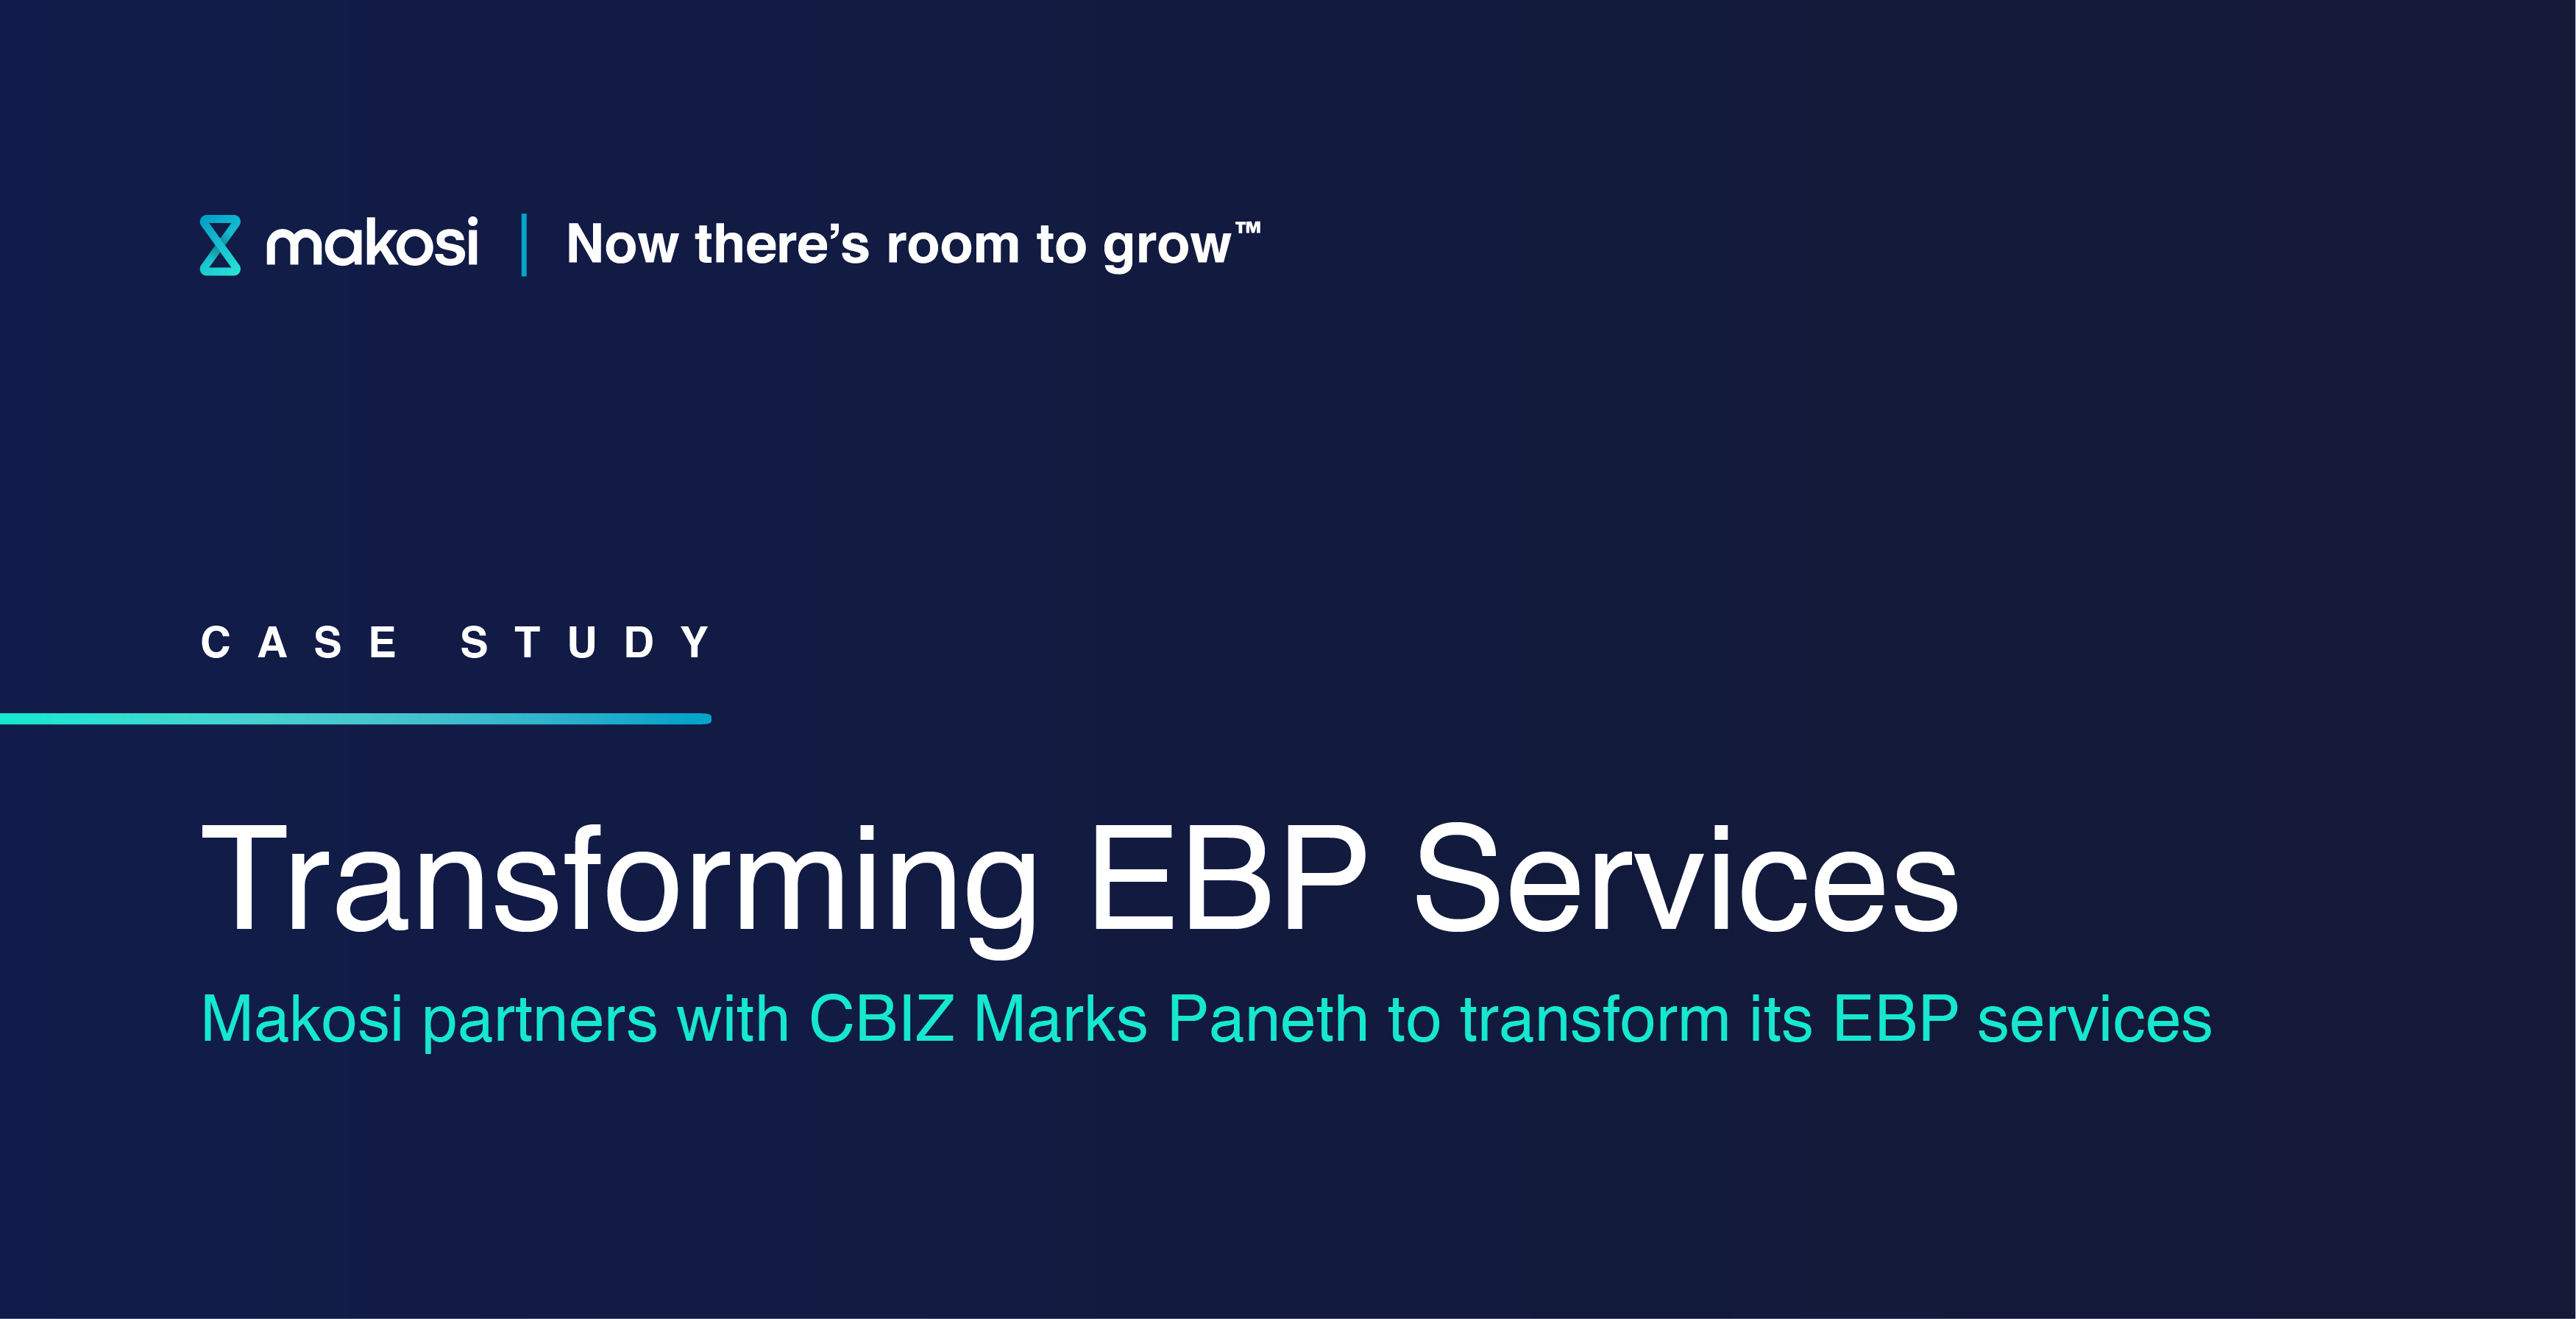 Makosi partners with CBIZ Marks Paneth to transform its EBP services